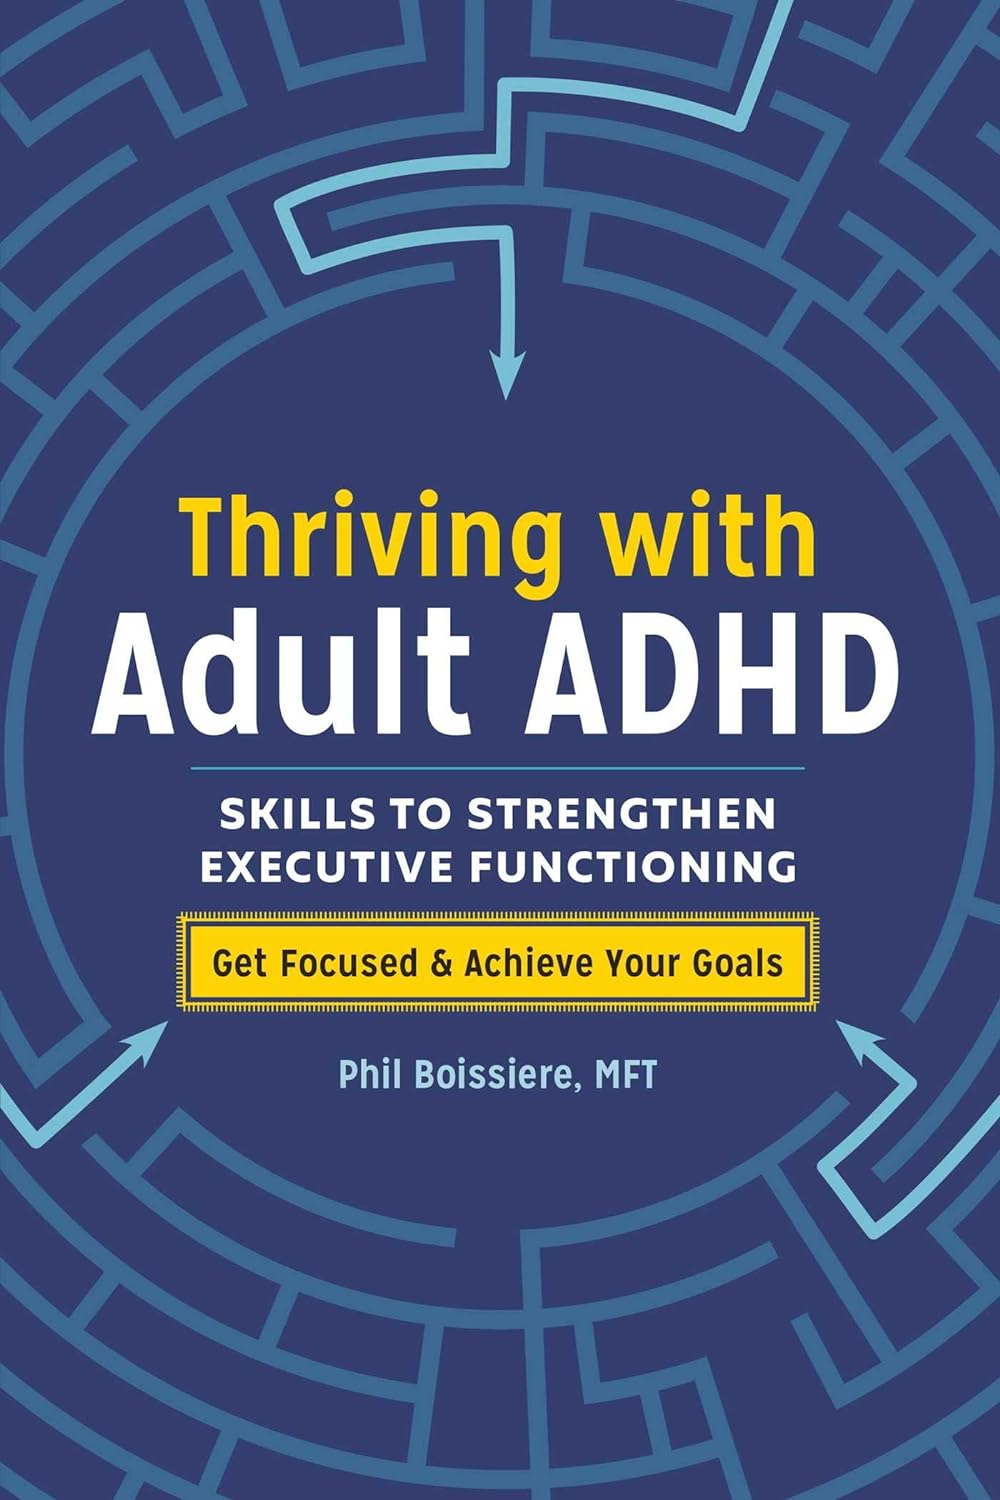 Thriving with Adult ADHD